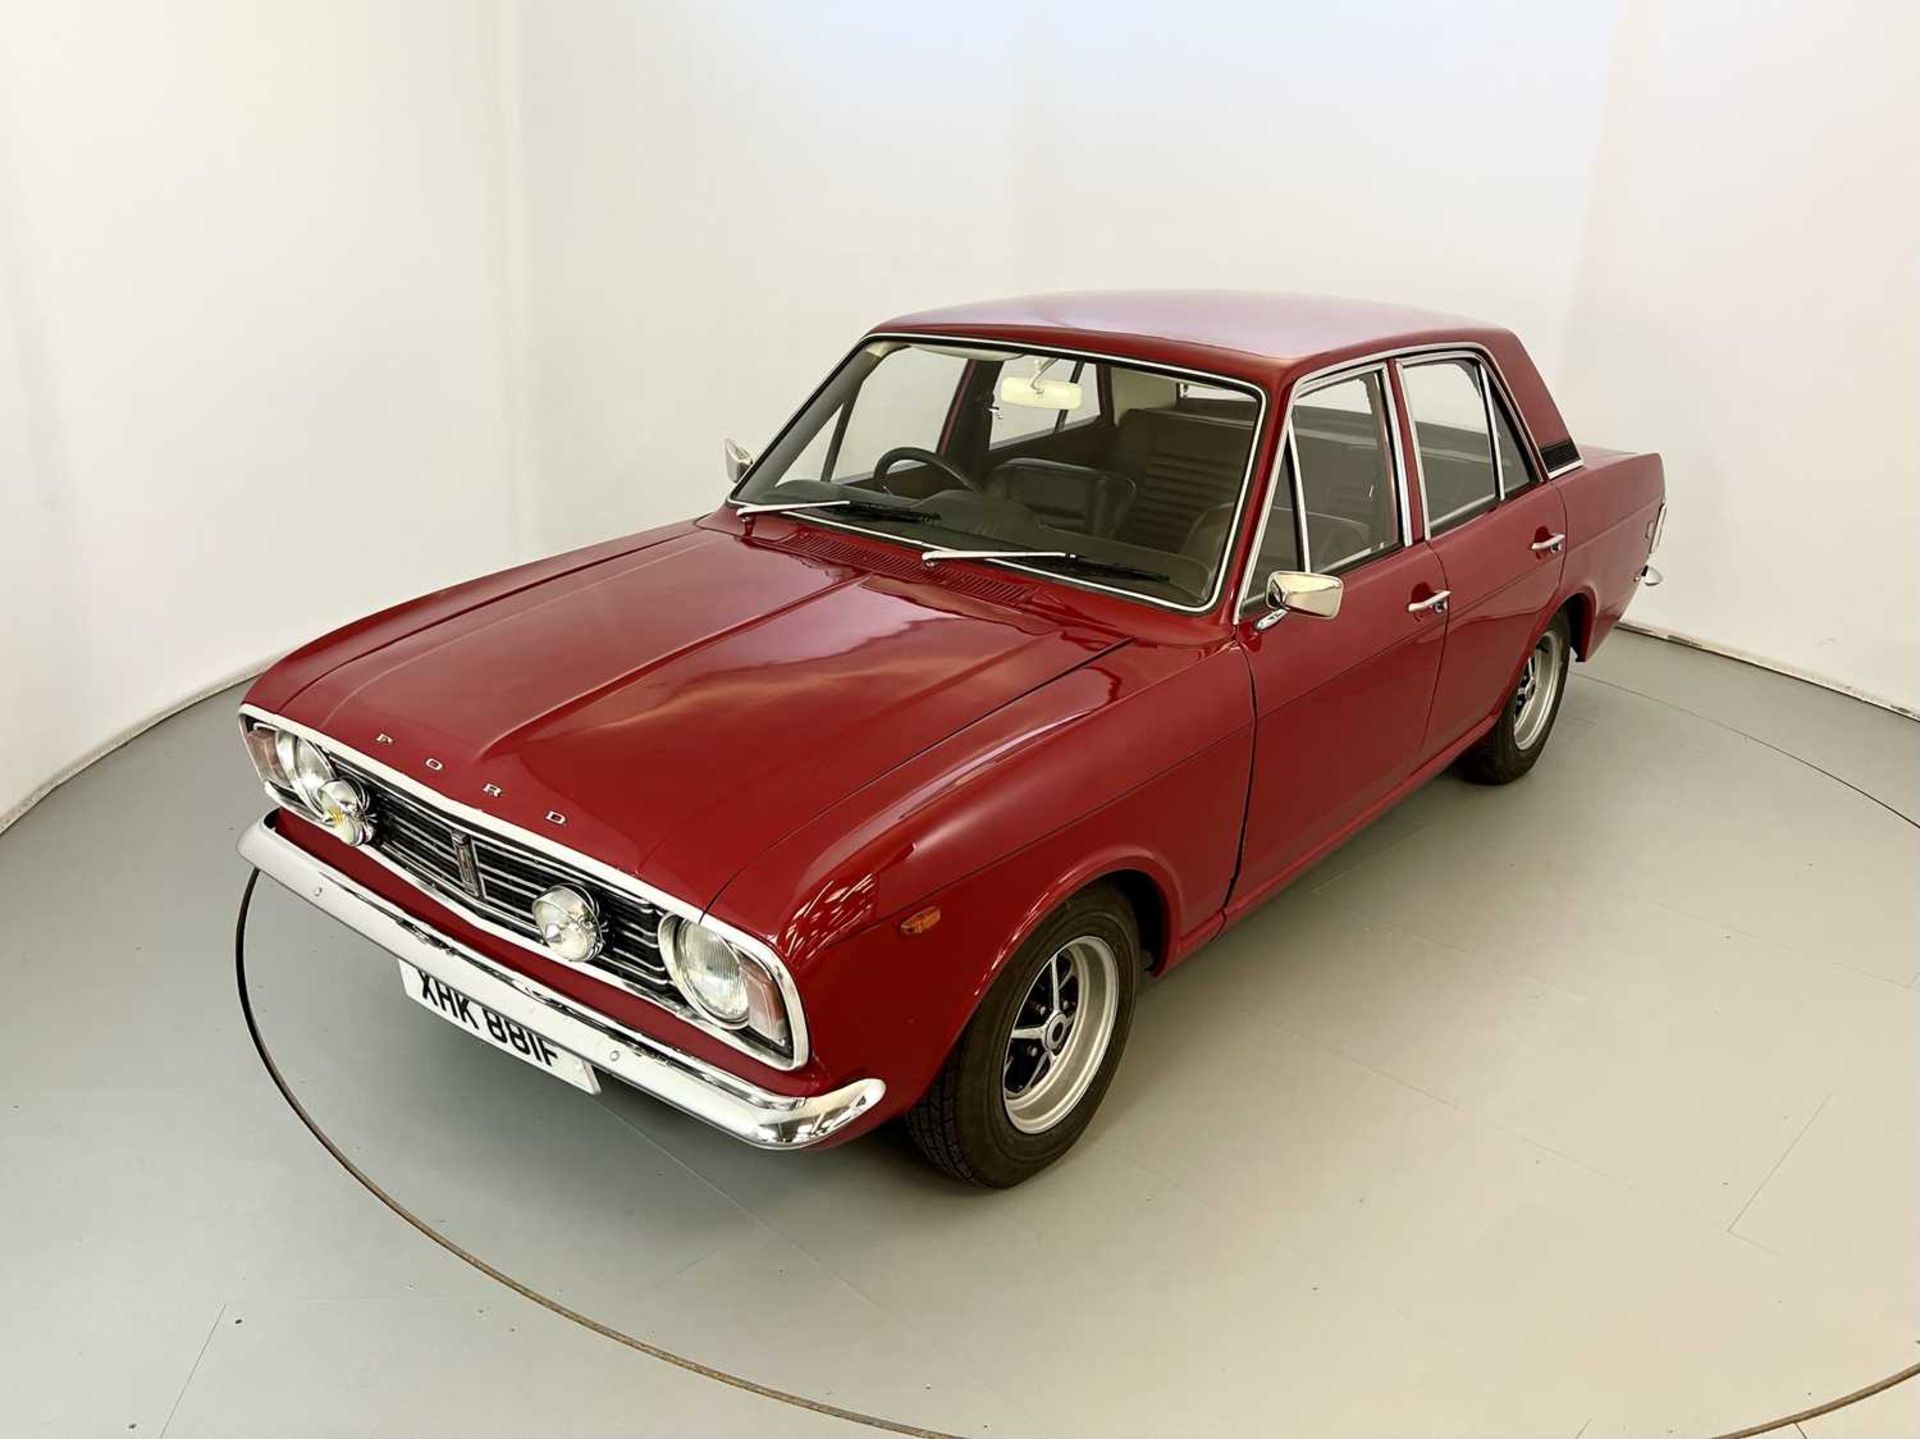 1967 Ford Cortina 1600GT - Image 35 of 37